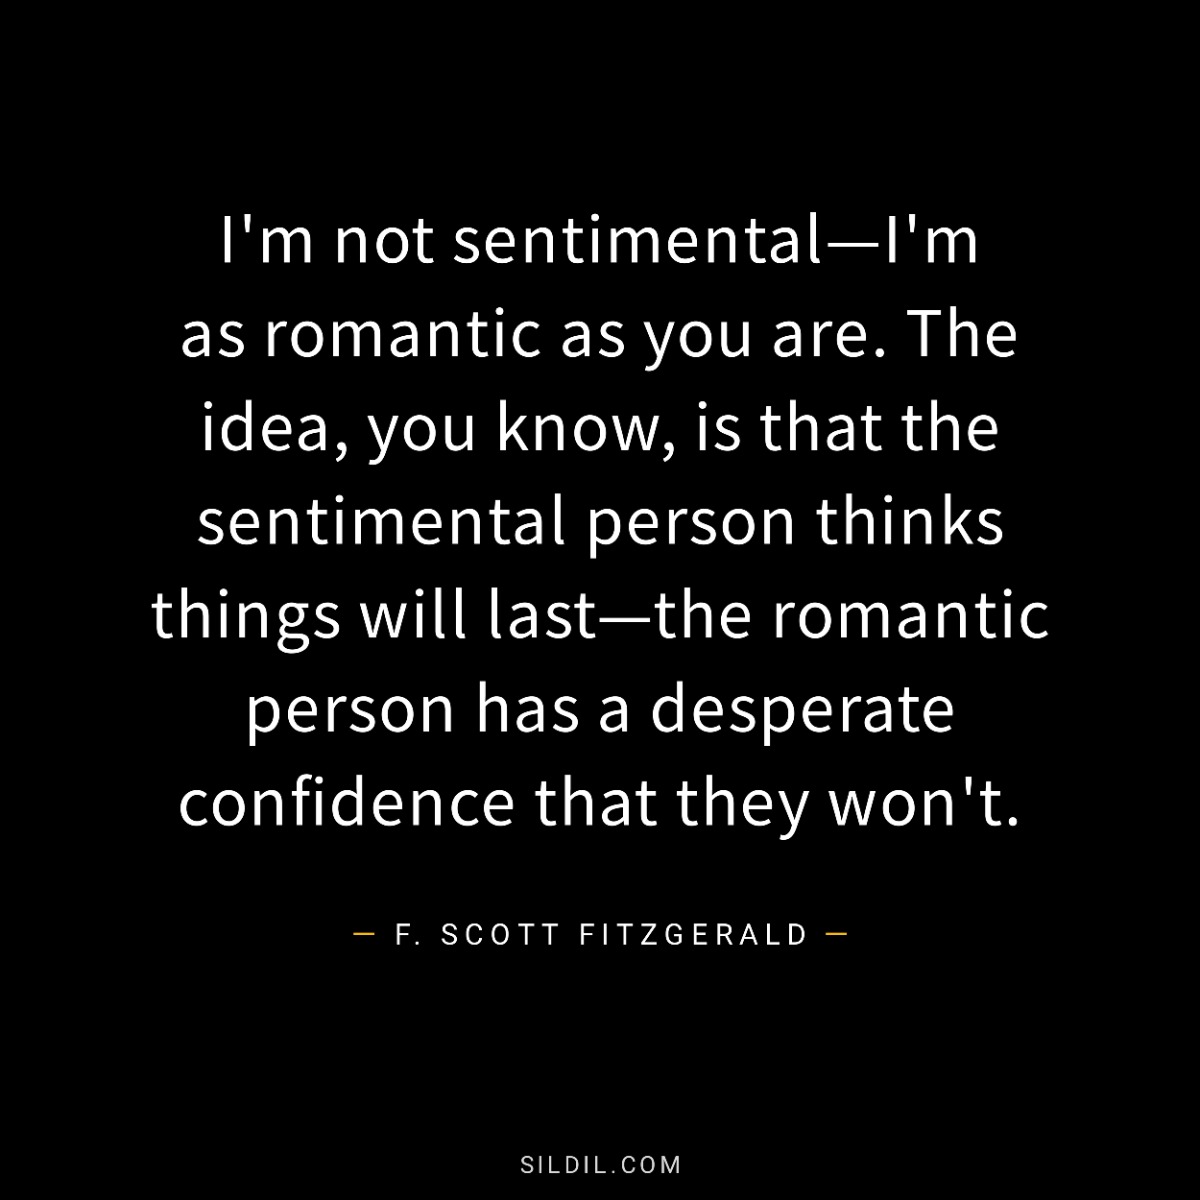 I'm not sentimental—I'm as romantic as you are. The idea, you know, is that the sentimental person thinks things will last—the romantic person has a desperate confidence that they won't.